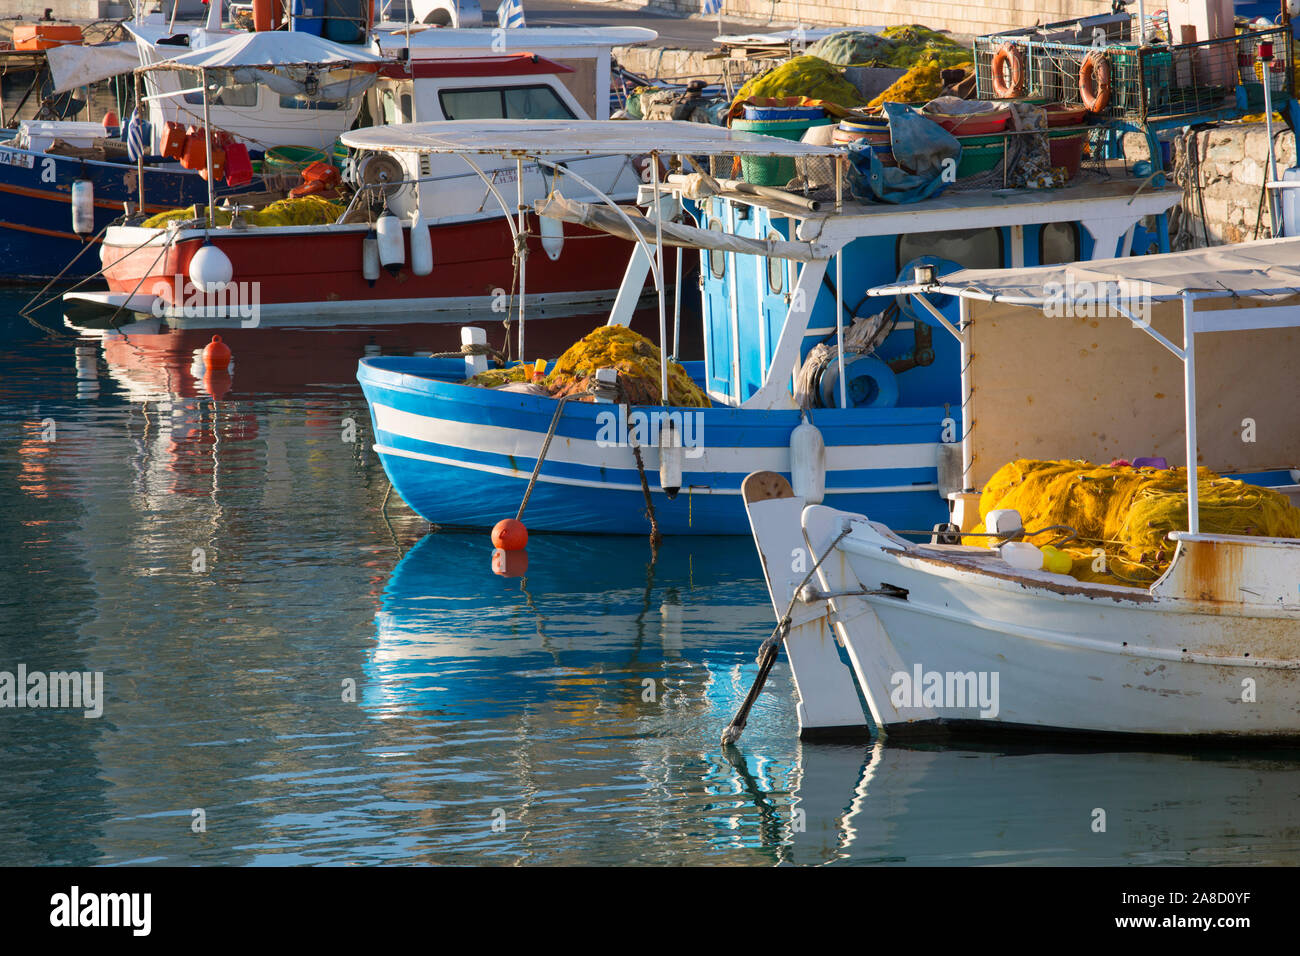 Heraklion, Crete, Greece. Fishing boats reflected in the tranquil waters of the Venetian Harbour. Stock Photo